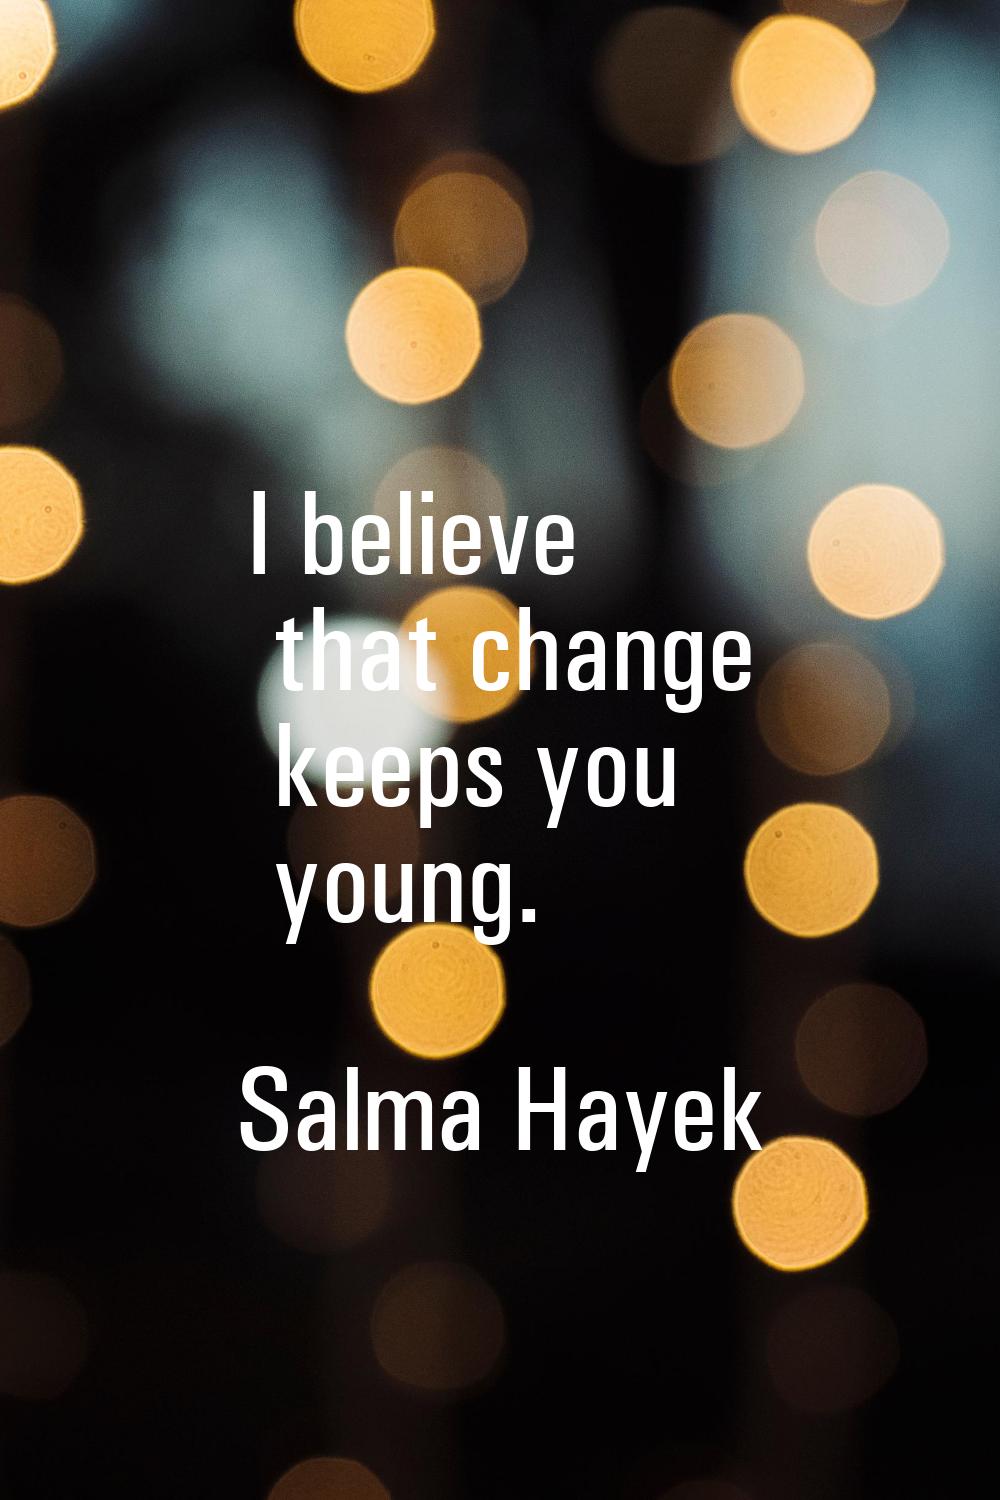 I believe that change keeps you young.